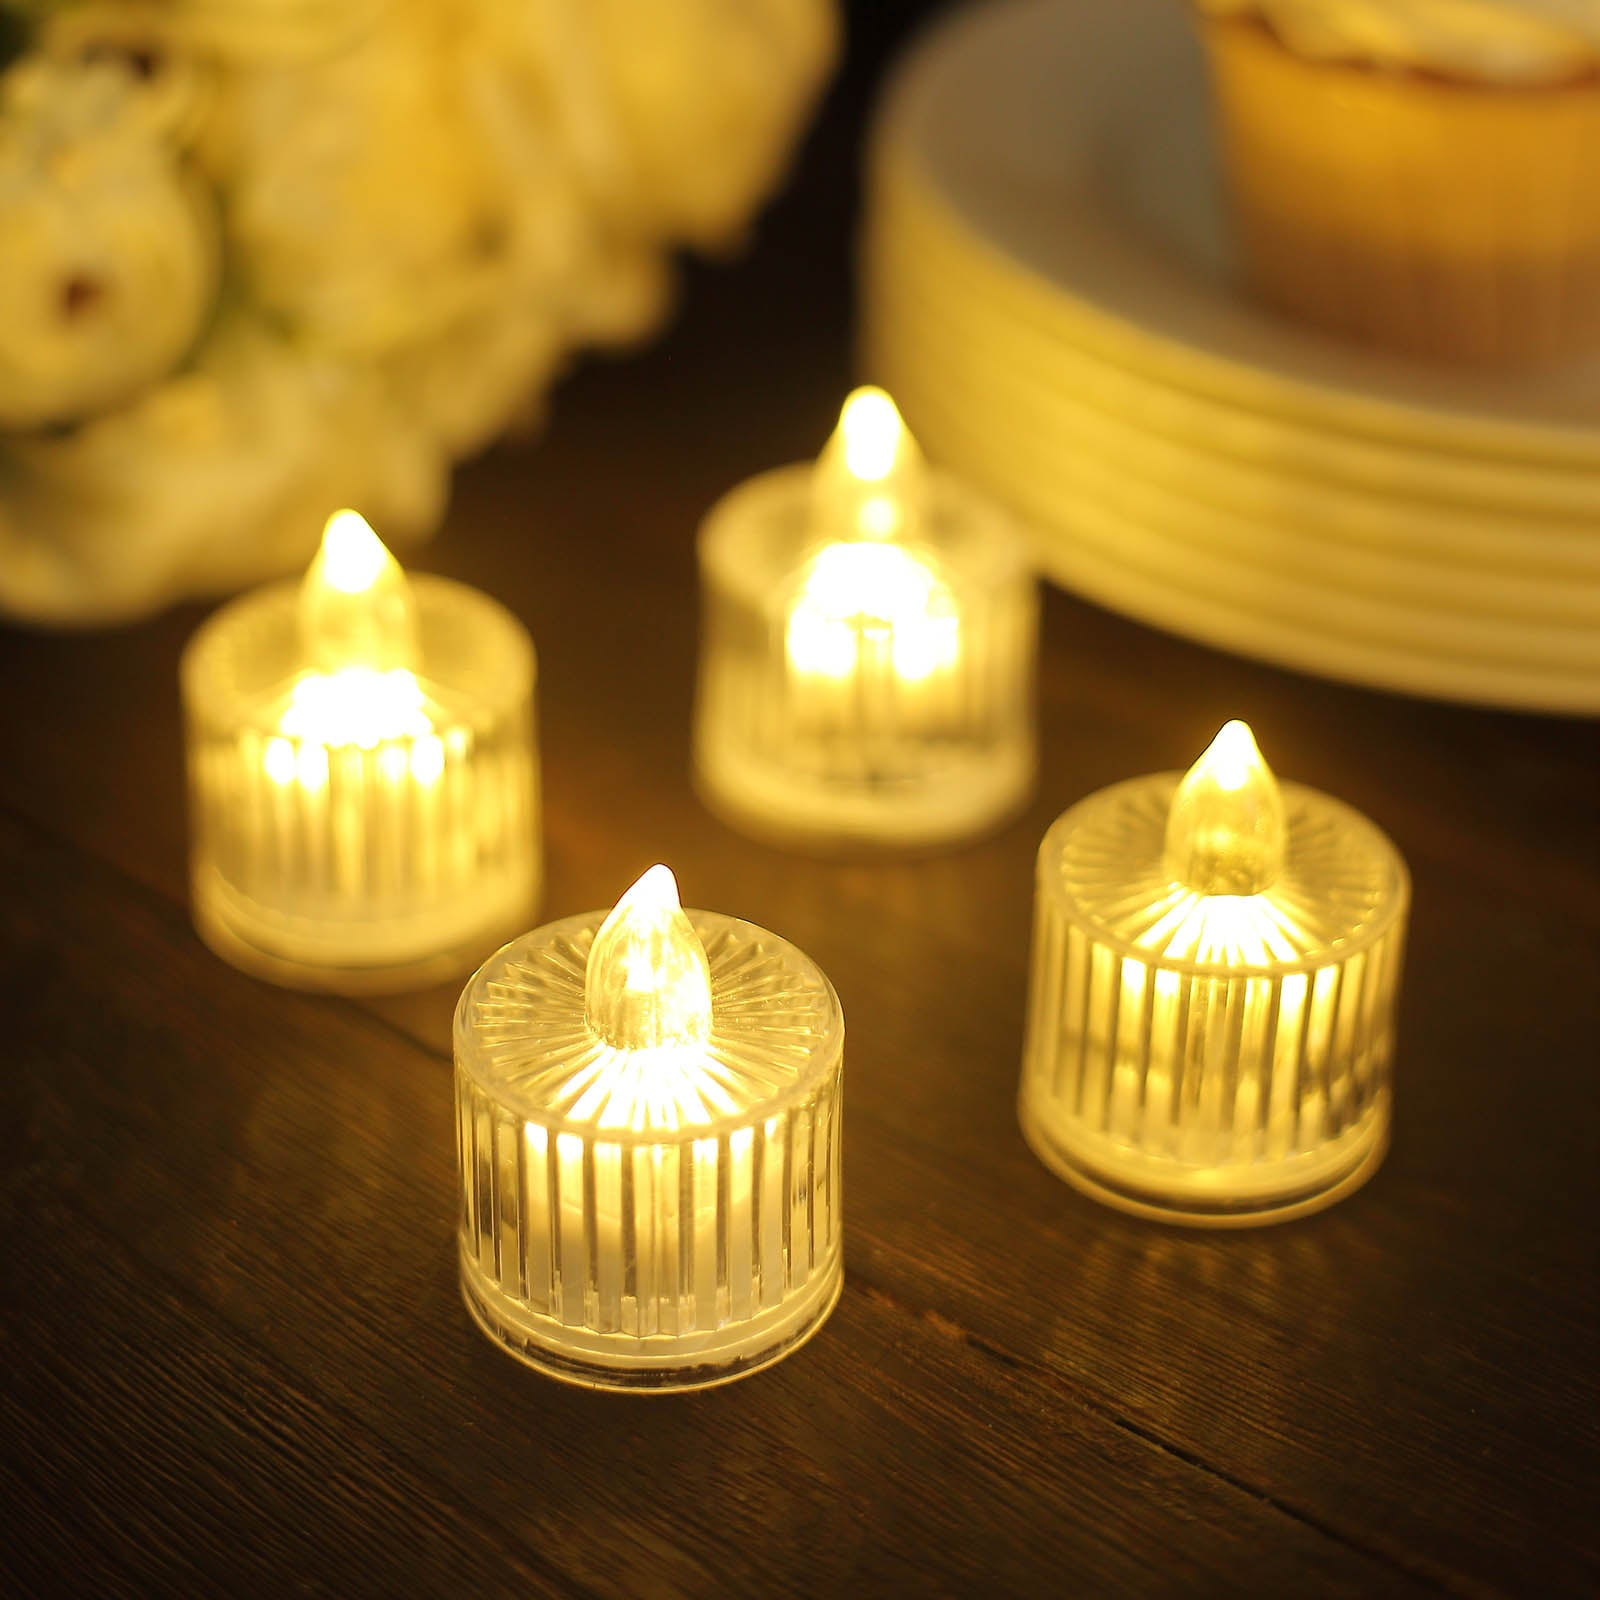 Efavormart 12 Pack  2 Warm White Column Battery-Operated LED Tealight  Candles, Decorative Flameless Tea Lights 